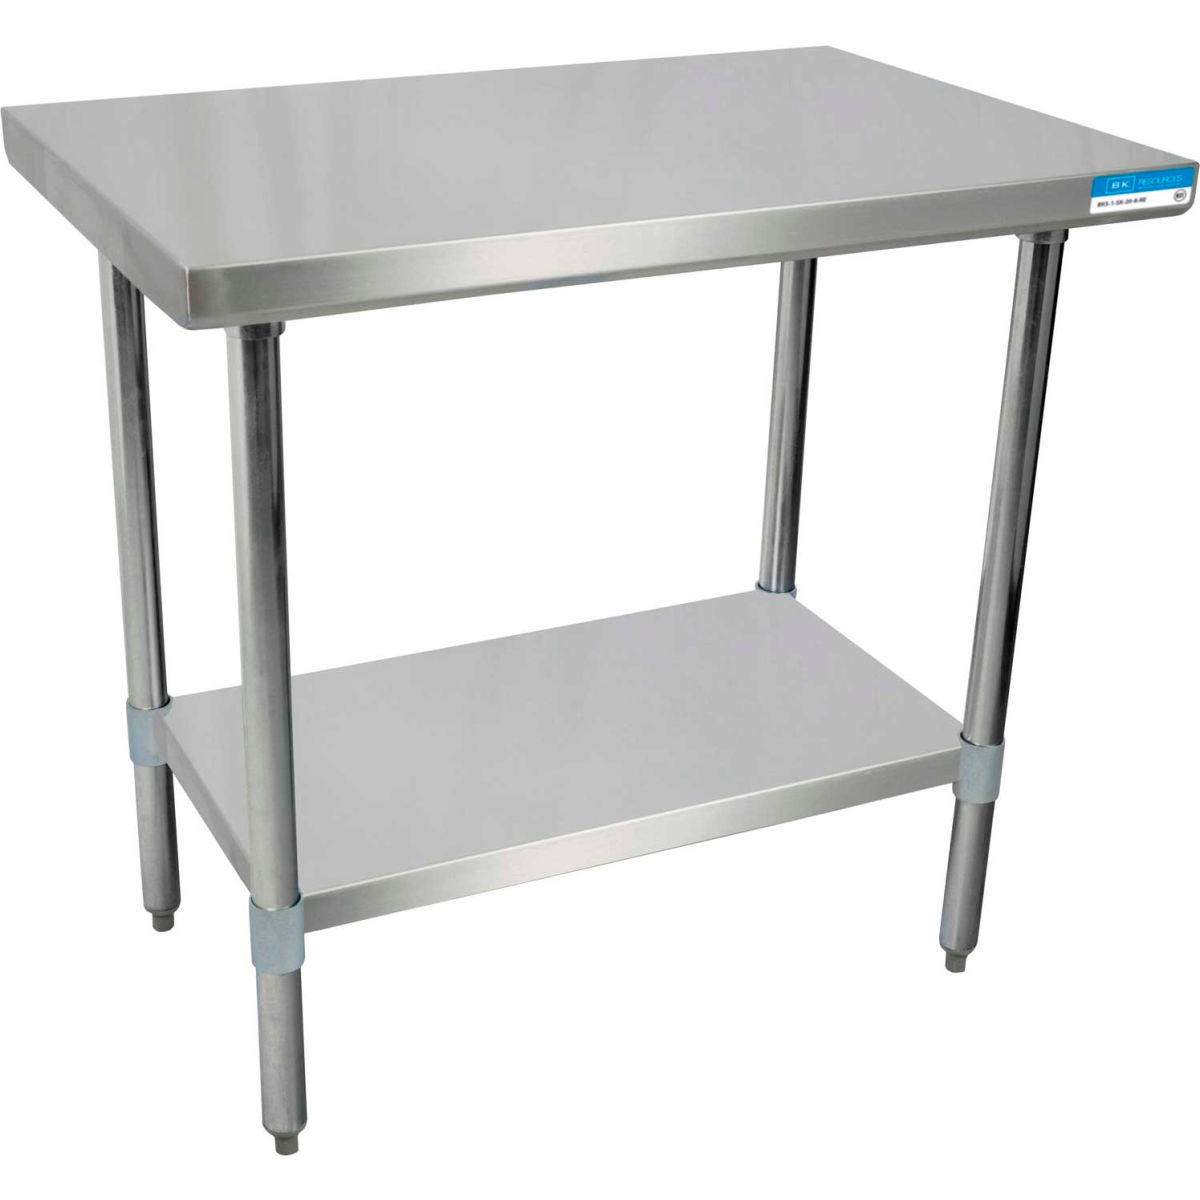 Picture of BK Resources B0899564 18 Gauge 430 Series Stainless Workbench with Undershelf - 60 x 30 in.